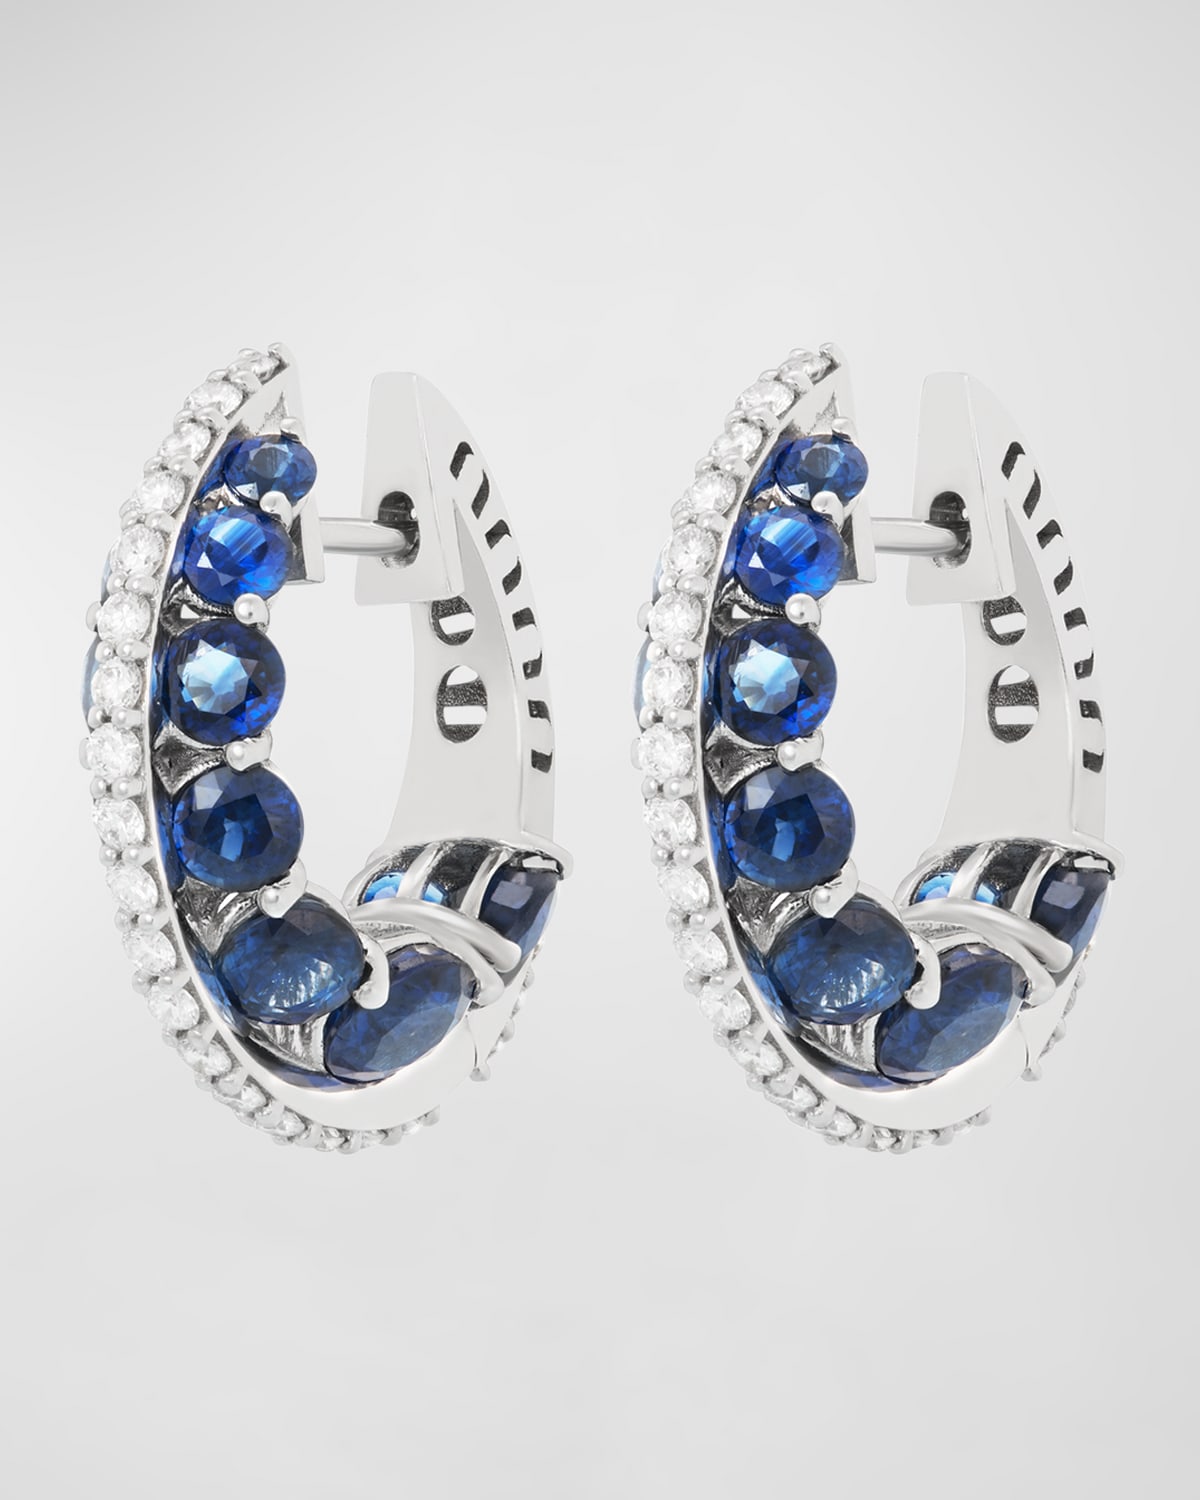 Procida 18K White Gold Earrings with White Diamonds and Blue Sapphires